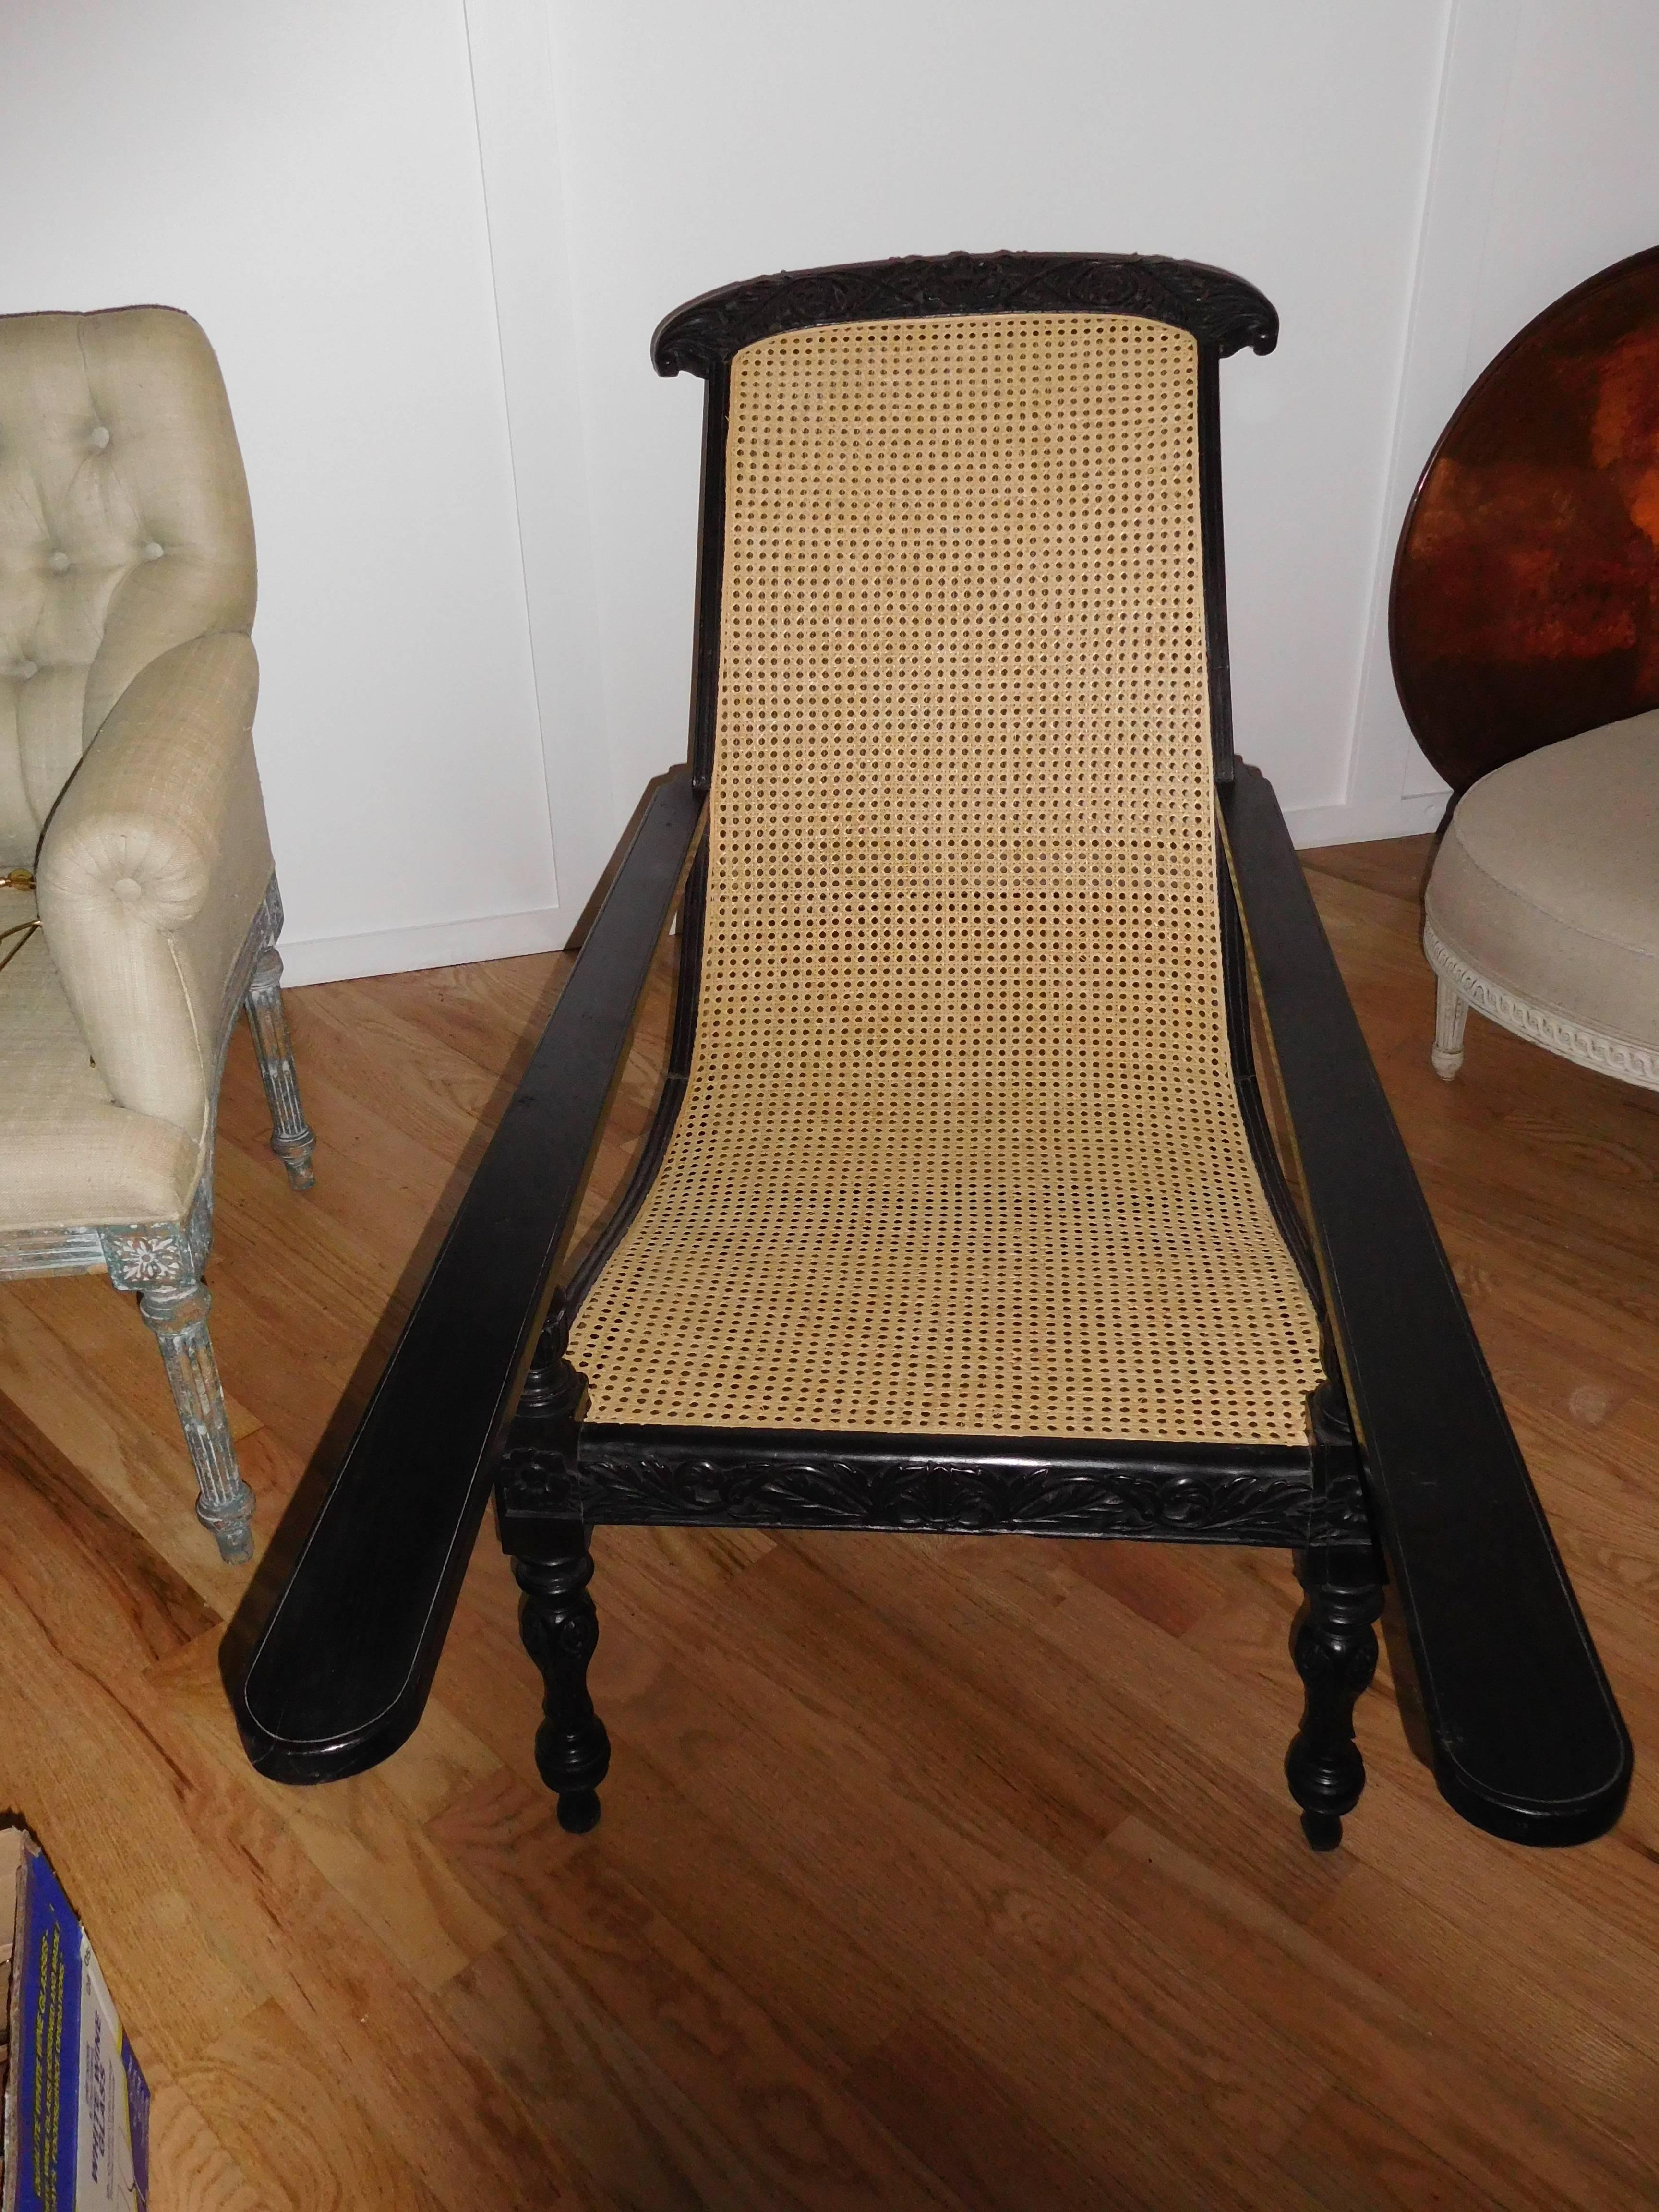 A magnificent Anglo-Indian plantation chair with a hand carved solid ebony wood frame. New caning,immaculate condition.
